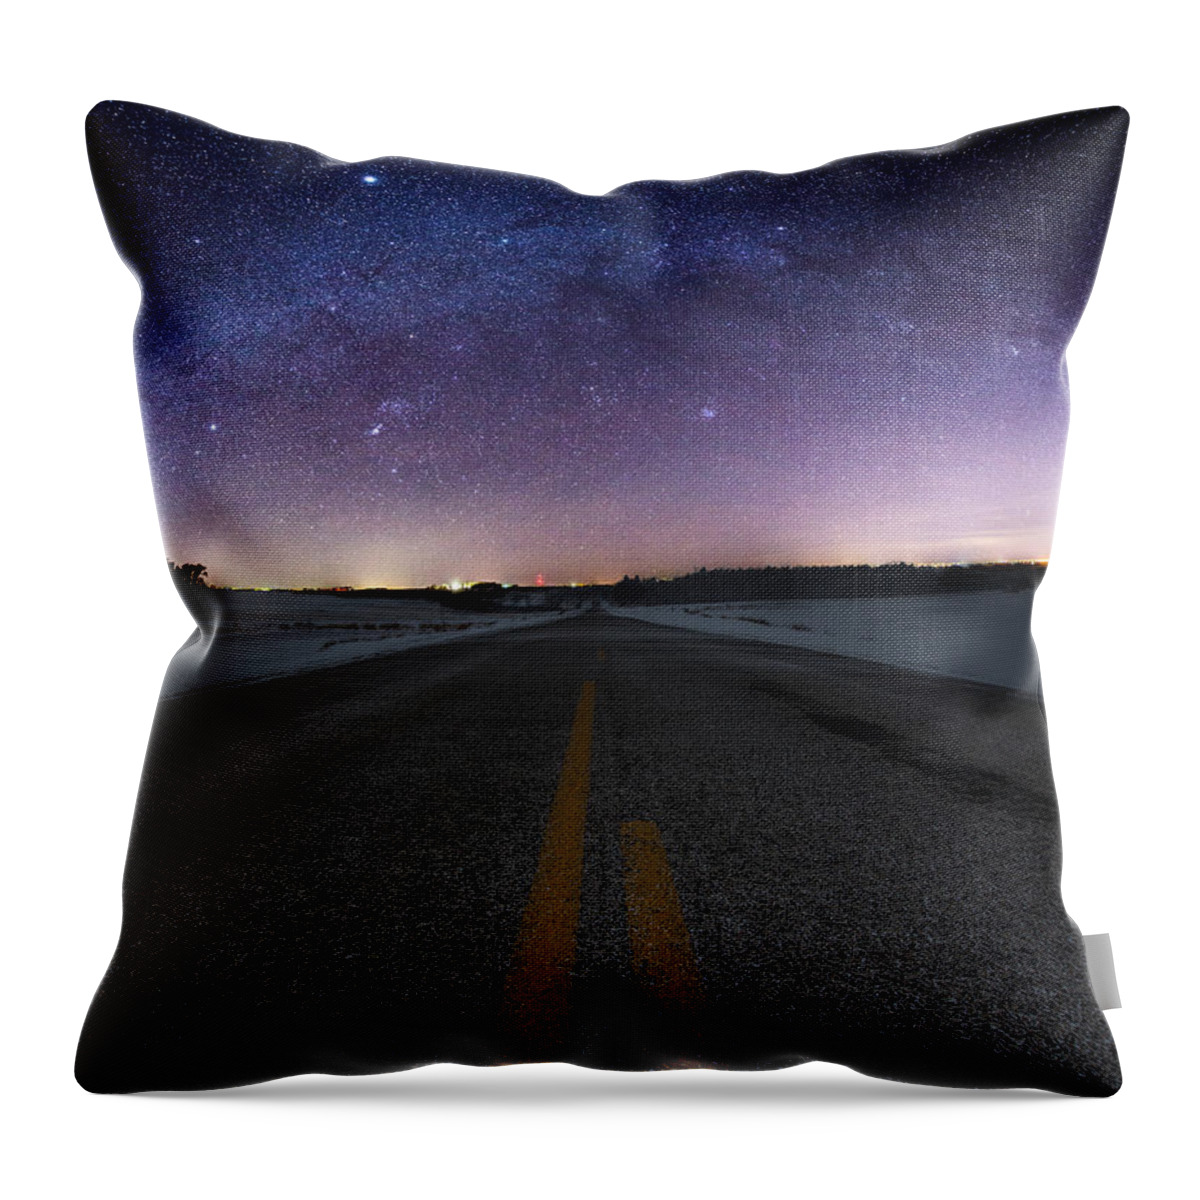 Winter Throw Pillow featuring the photograph Winter Milky Way by Aaron J Groen